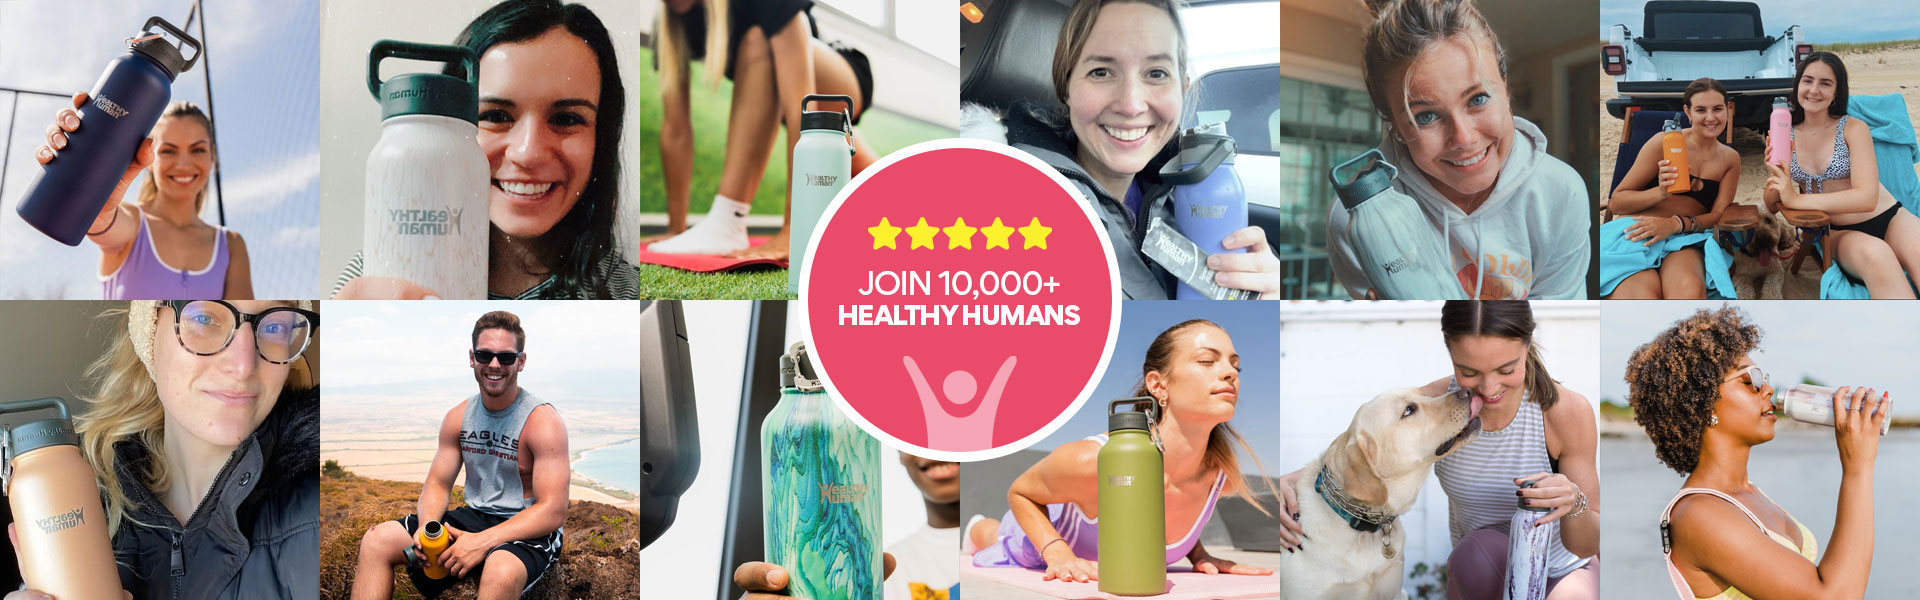 Join 10000+ Healthy Humans